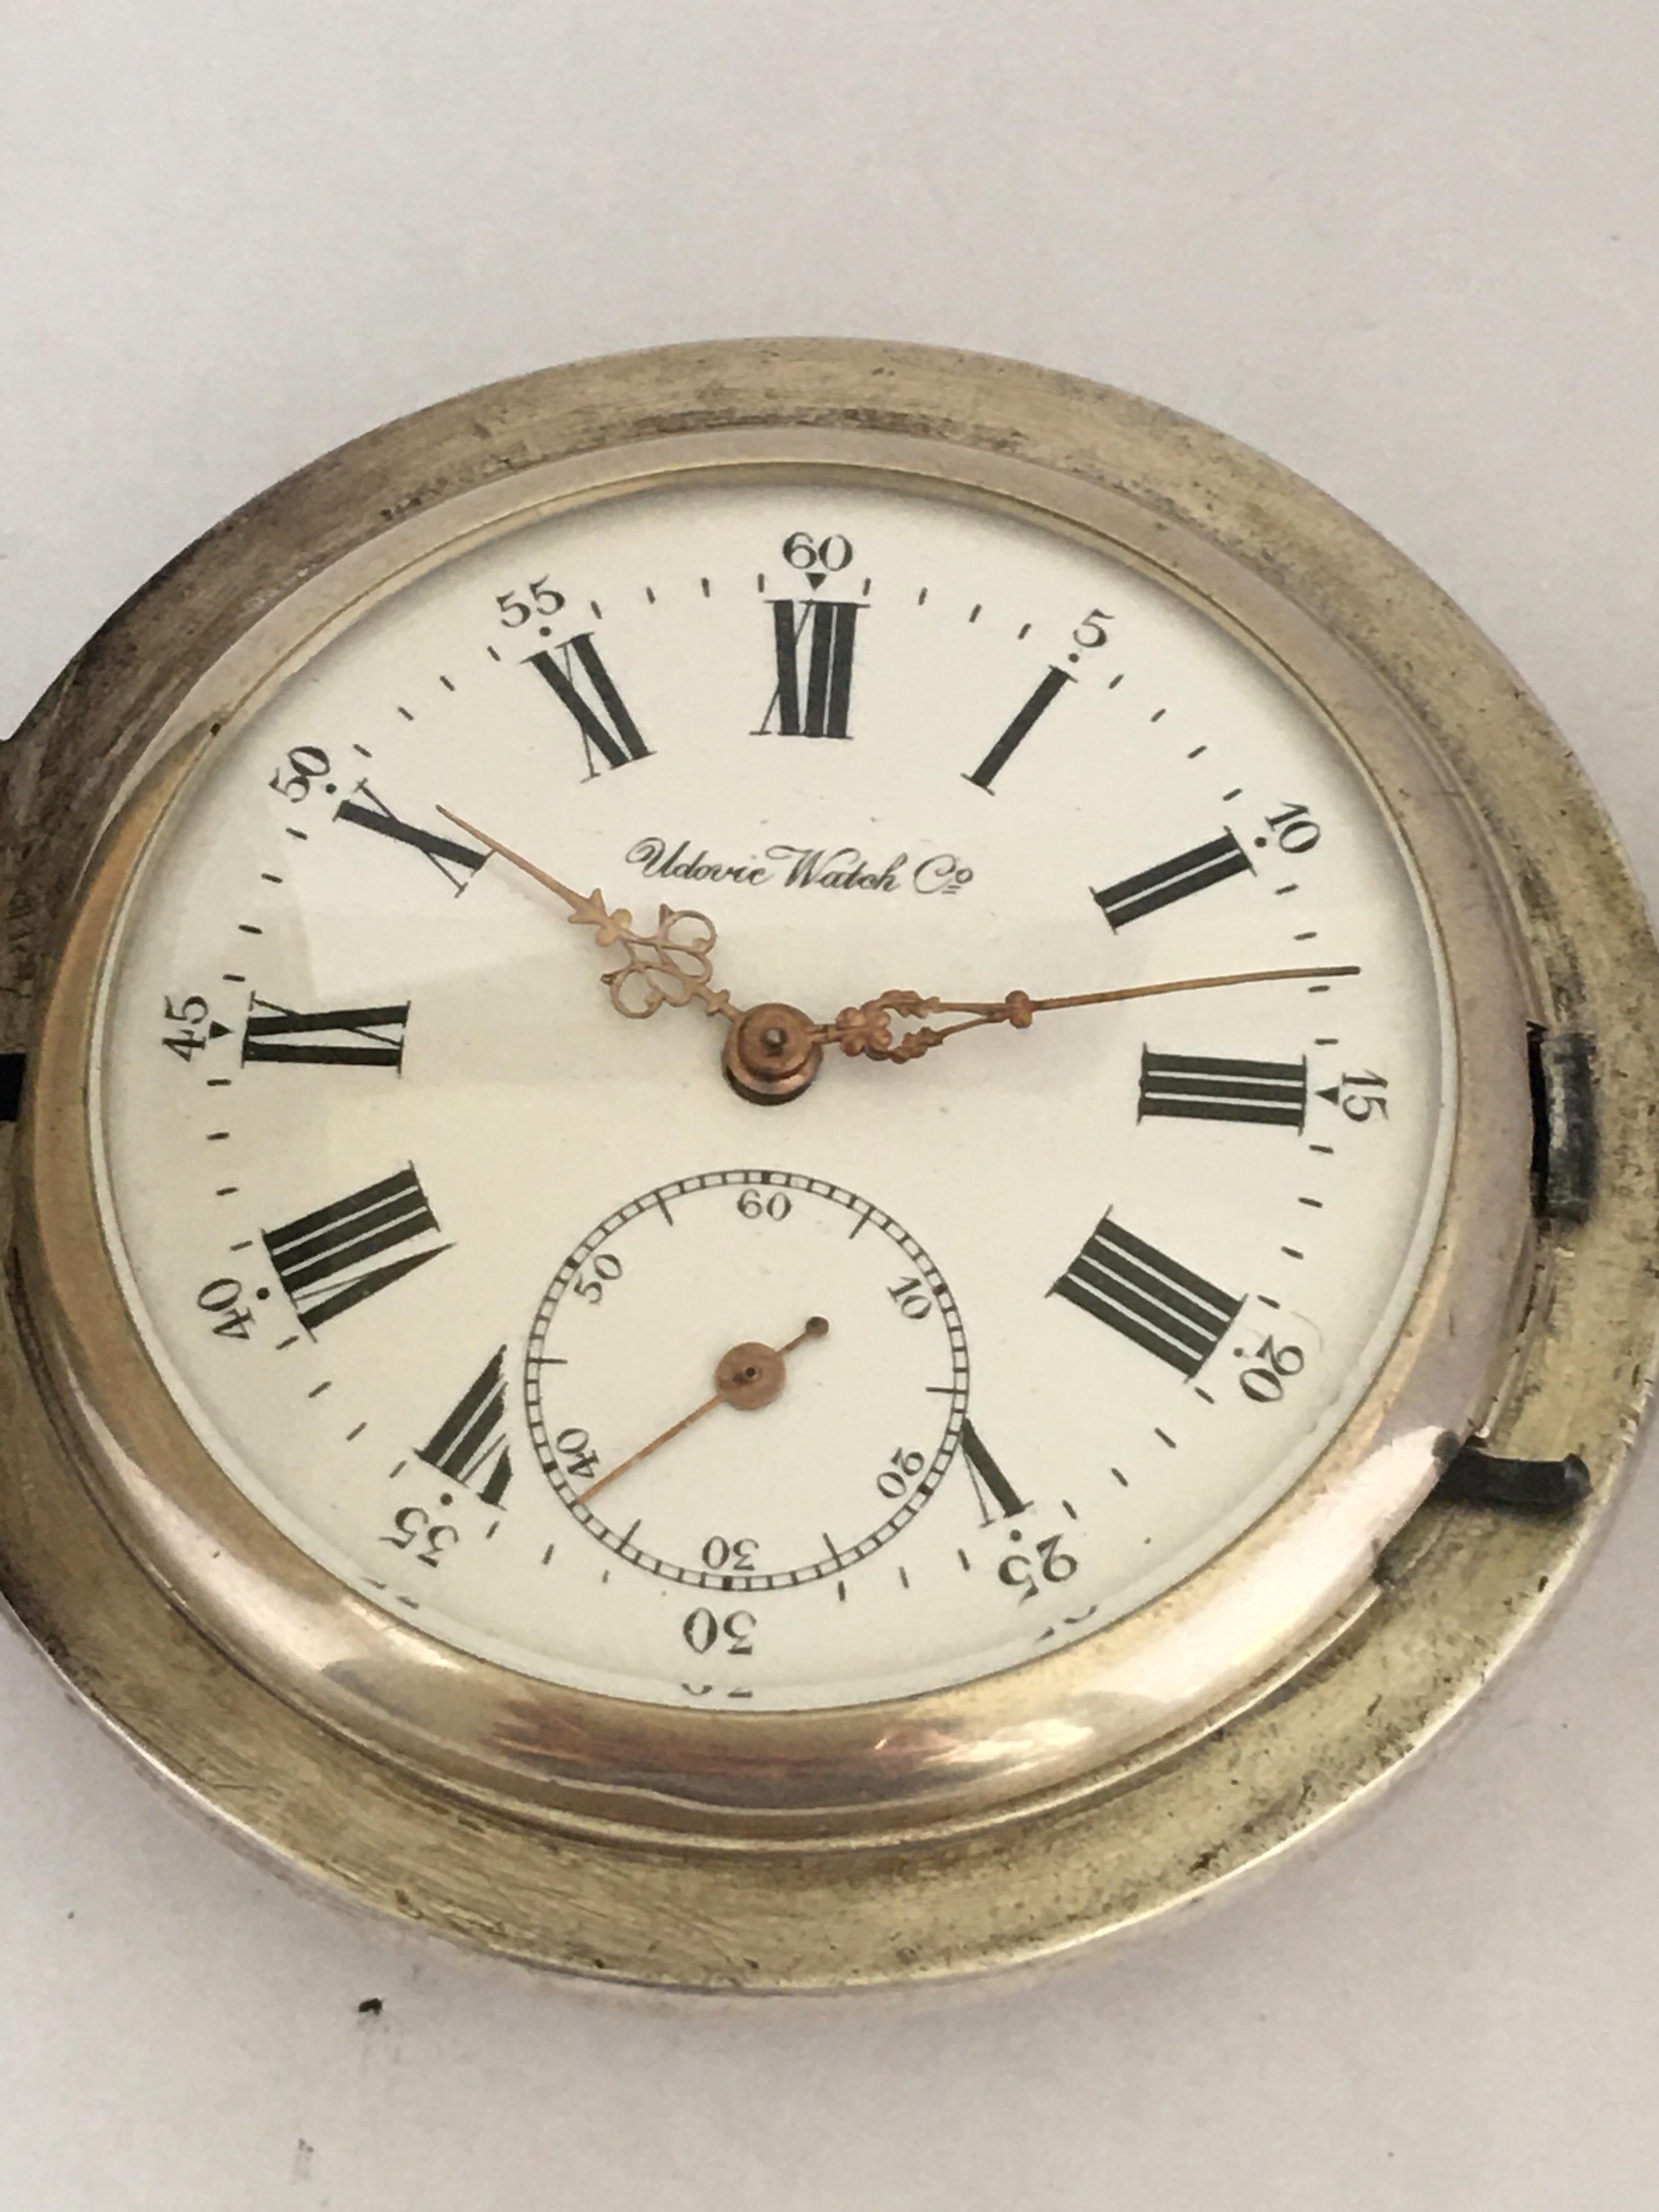 Antique Full Hunter Engraved Silver Pocket Watch Signed Udovic Watch Co. 7